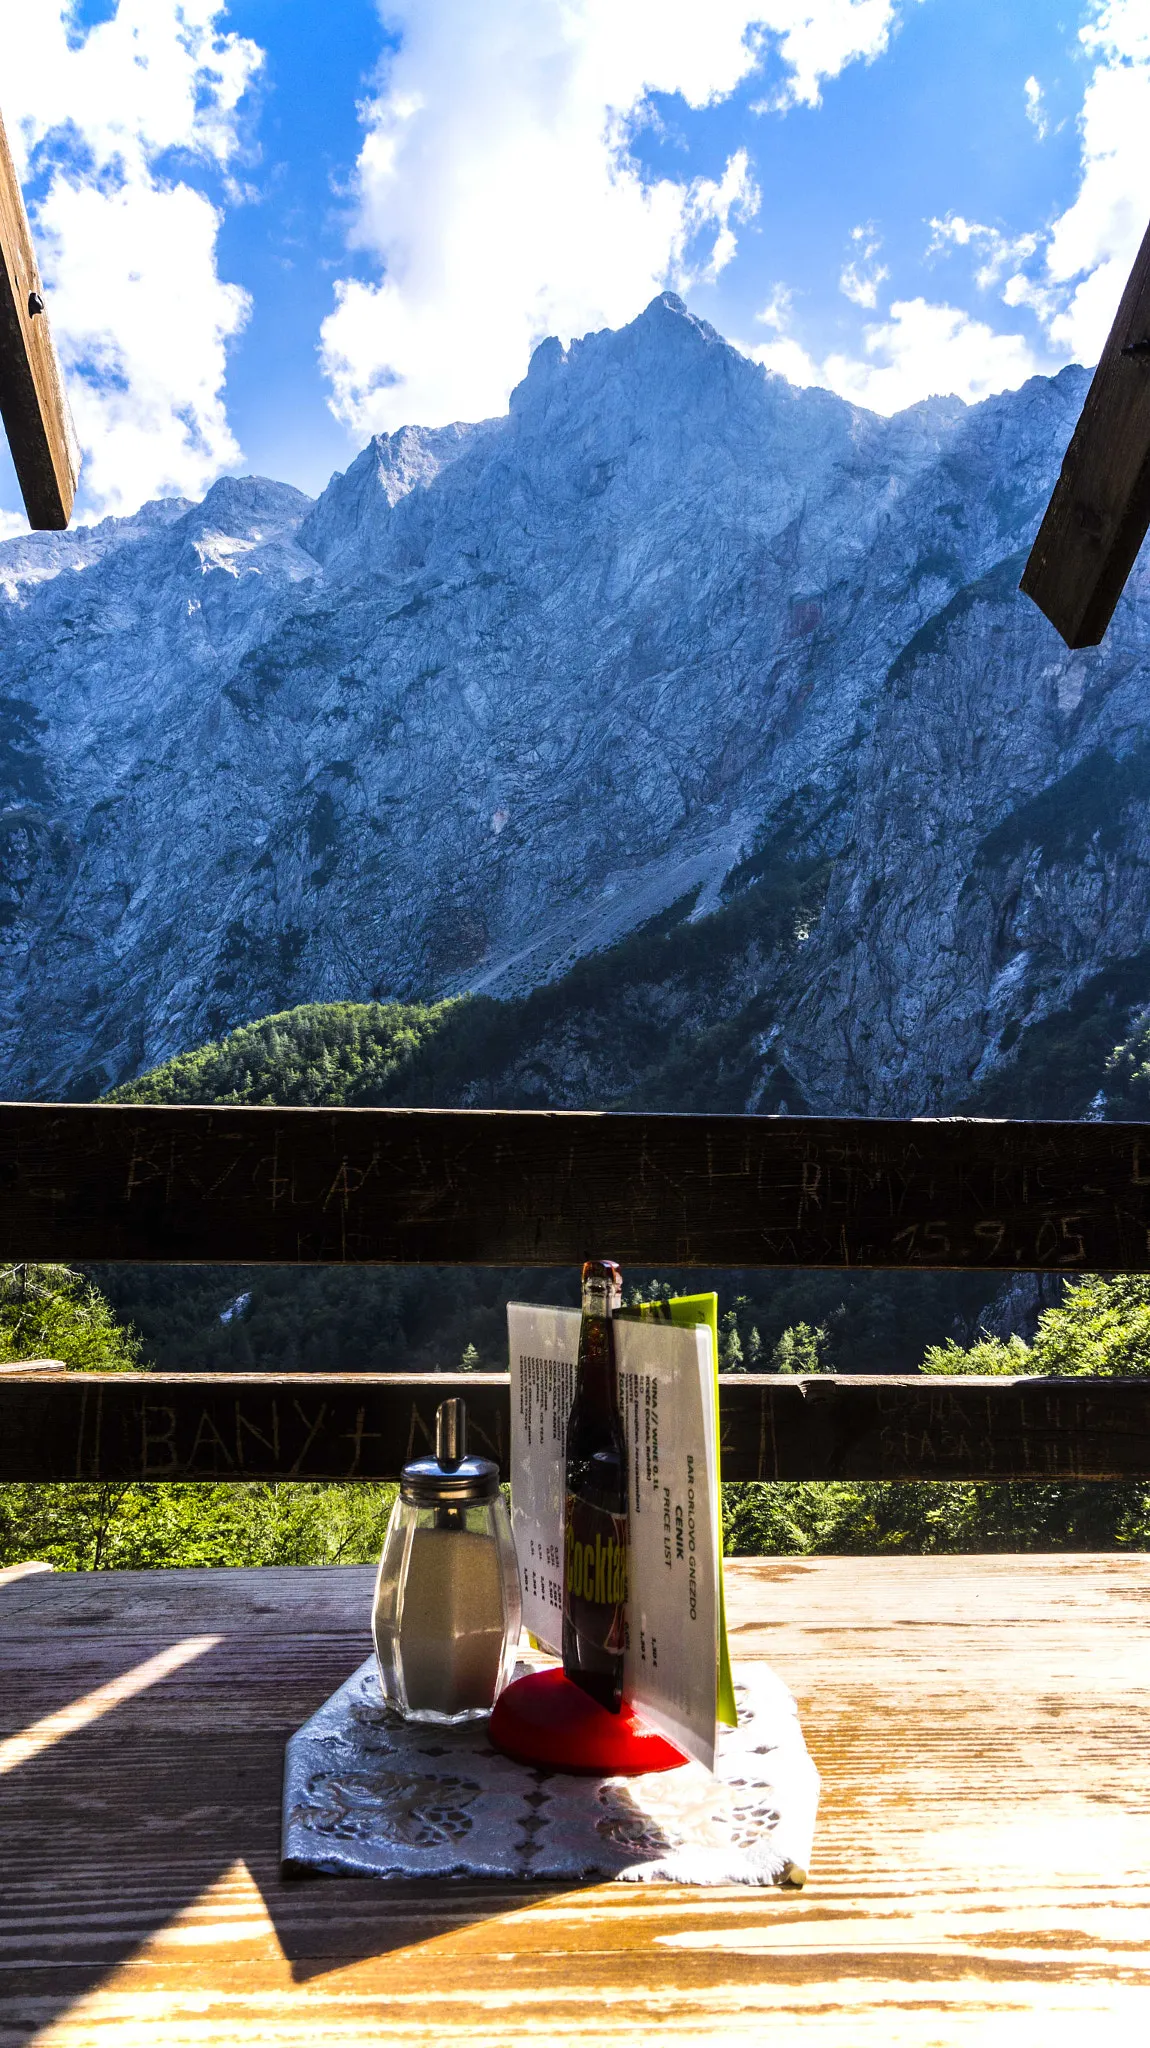 Photo showing: bar orlovo gnezdo, 500px provided description: Hangin' up there. The weather's pretty nice. [#sky ,#landscape ,#mountains ,#nature ,#travel ,#clouds ,#vacation ,#tourism ,#summer ,#green ,#food ,#sunny ,#relax ,#alps]